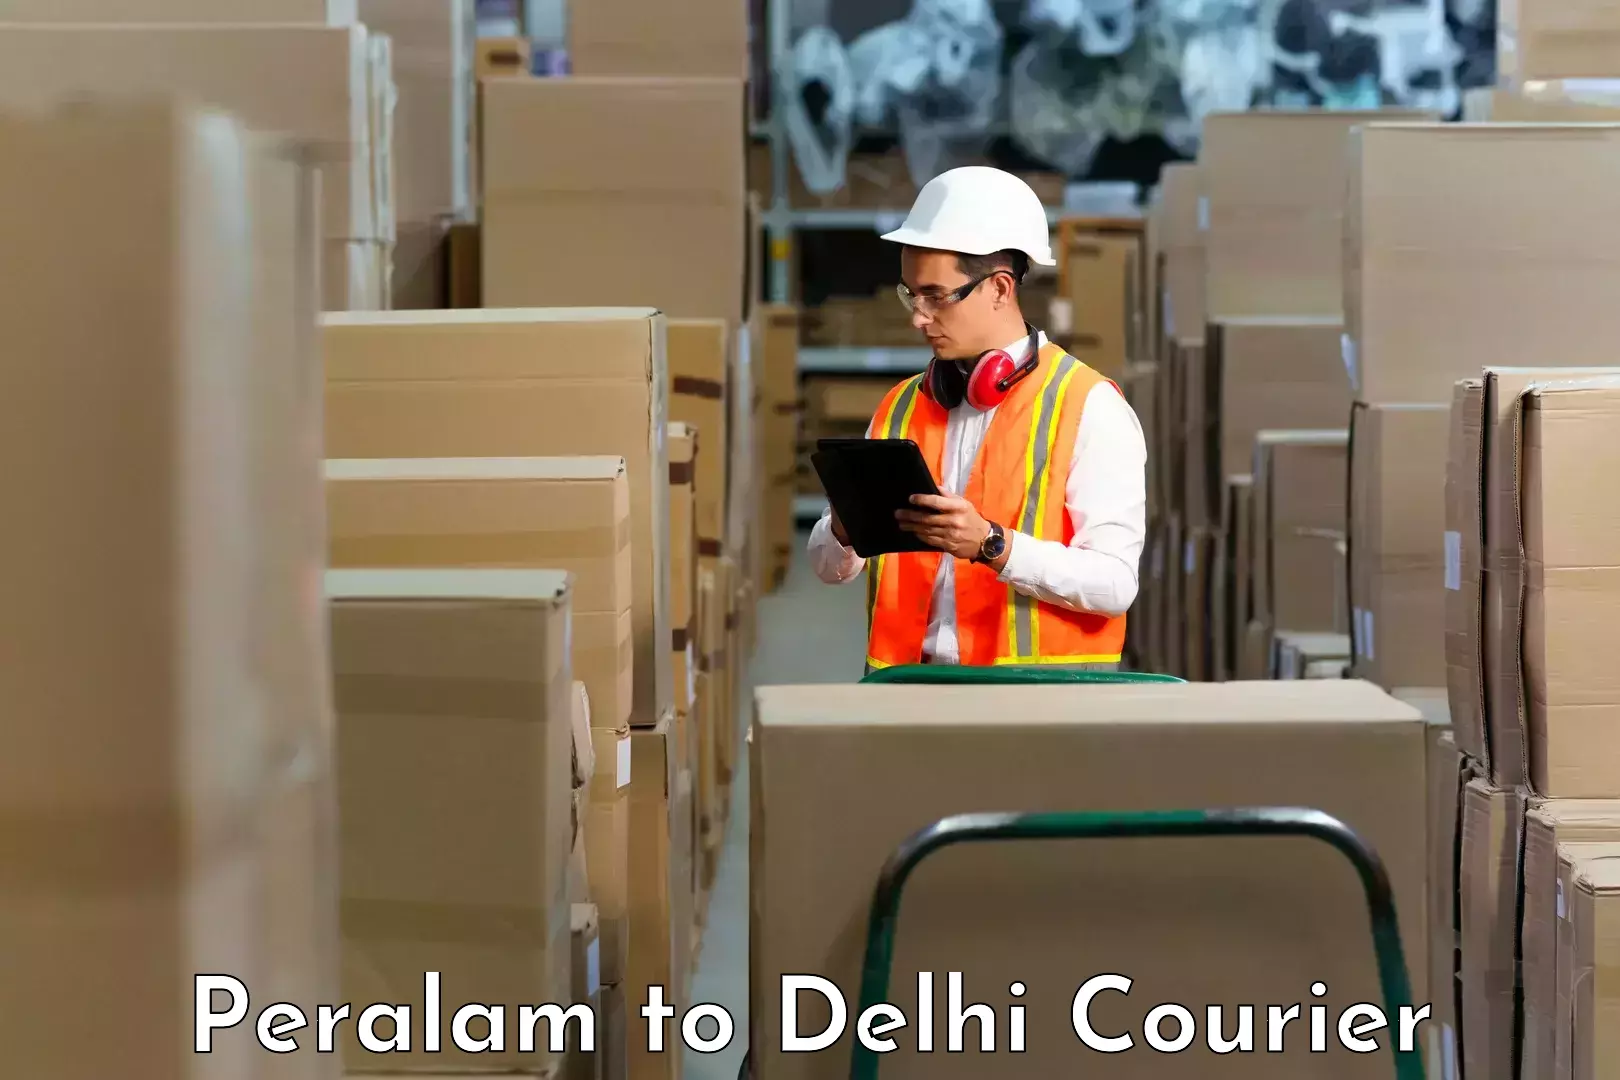 Flexible delivery schedules Peralam to University of Delhi